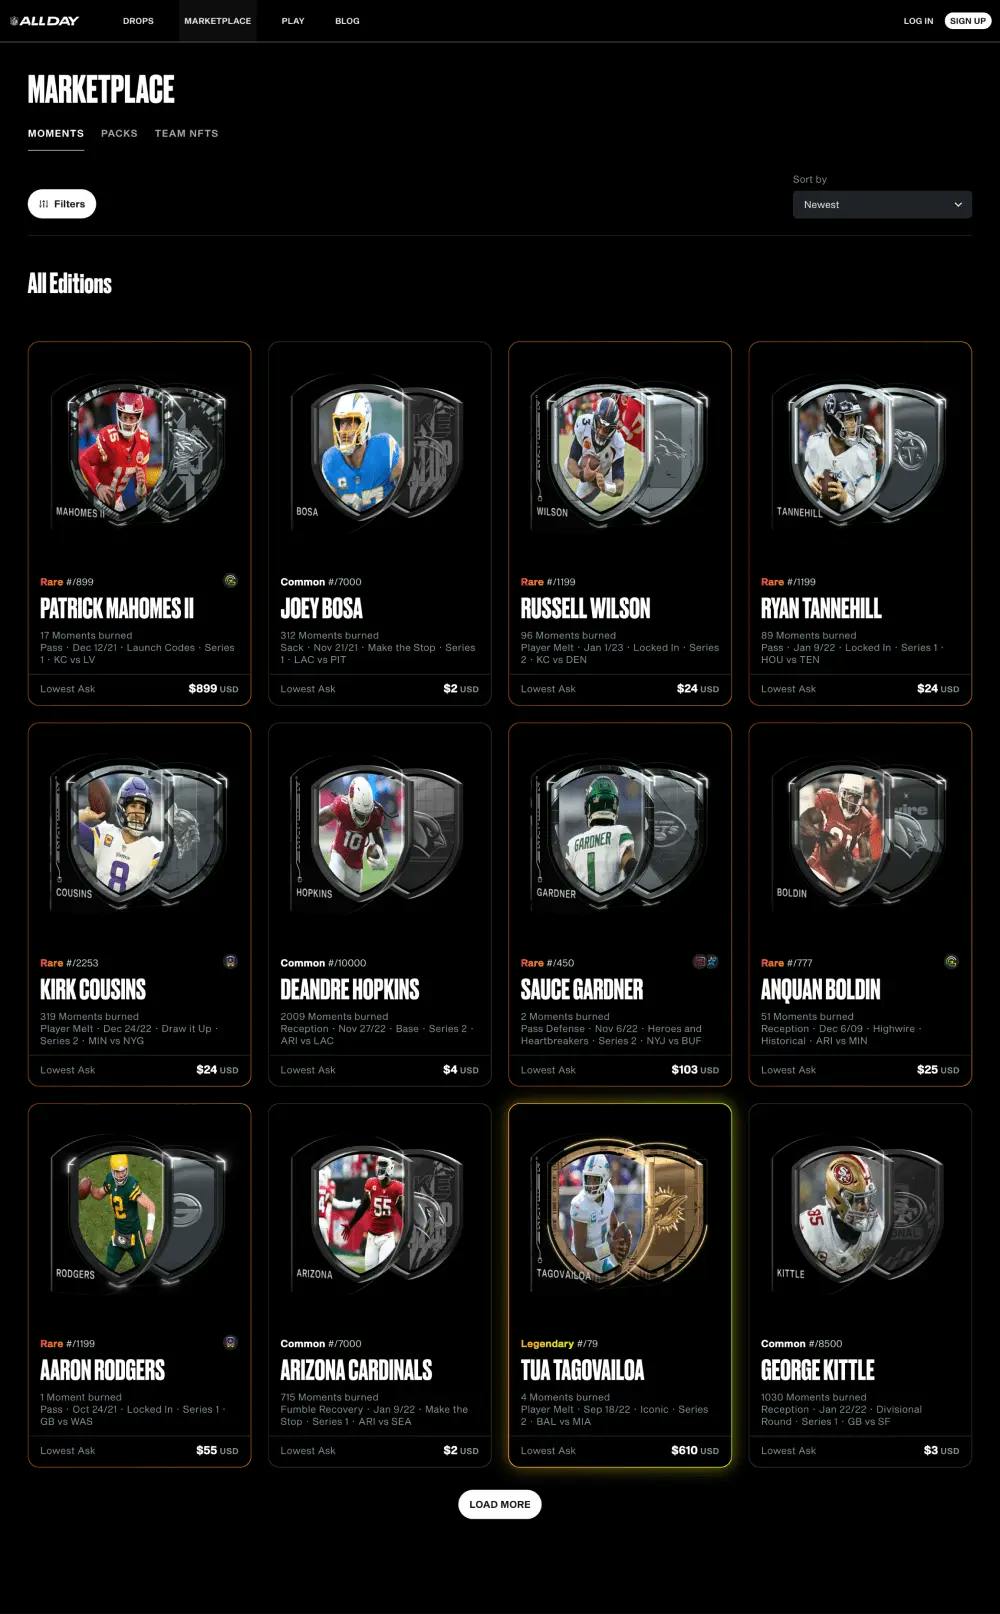 Image of NFL All webpage showing Marketplace